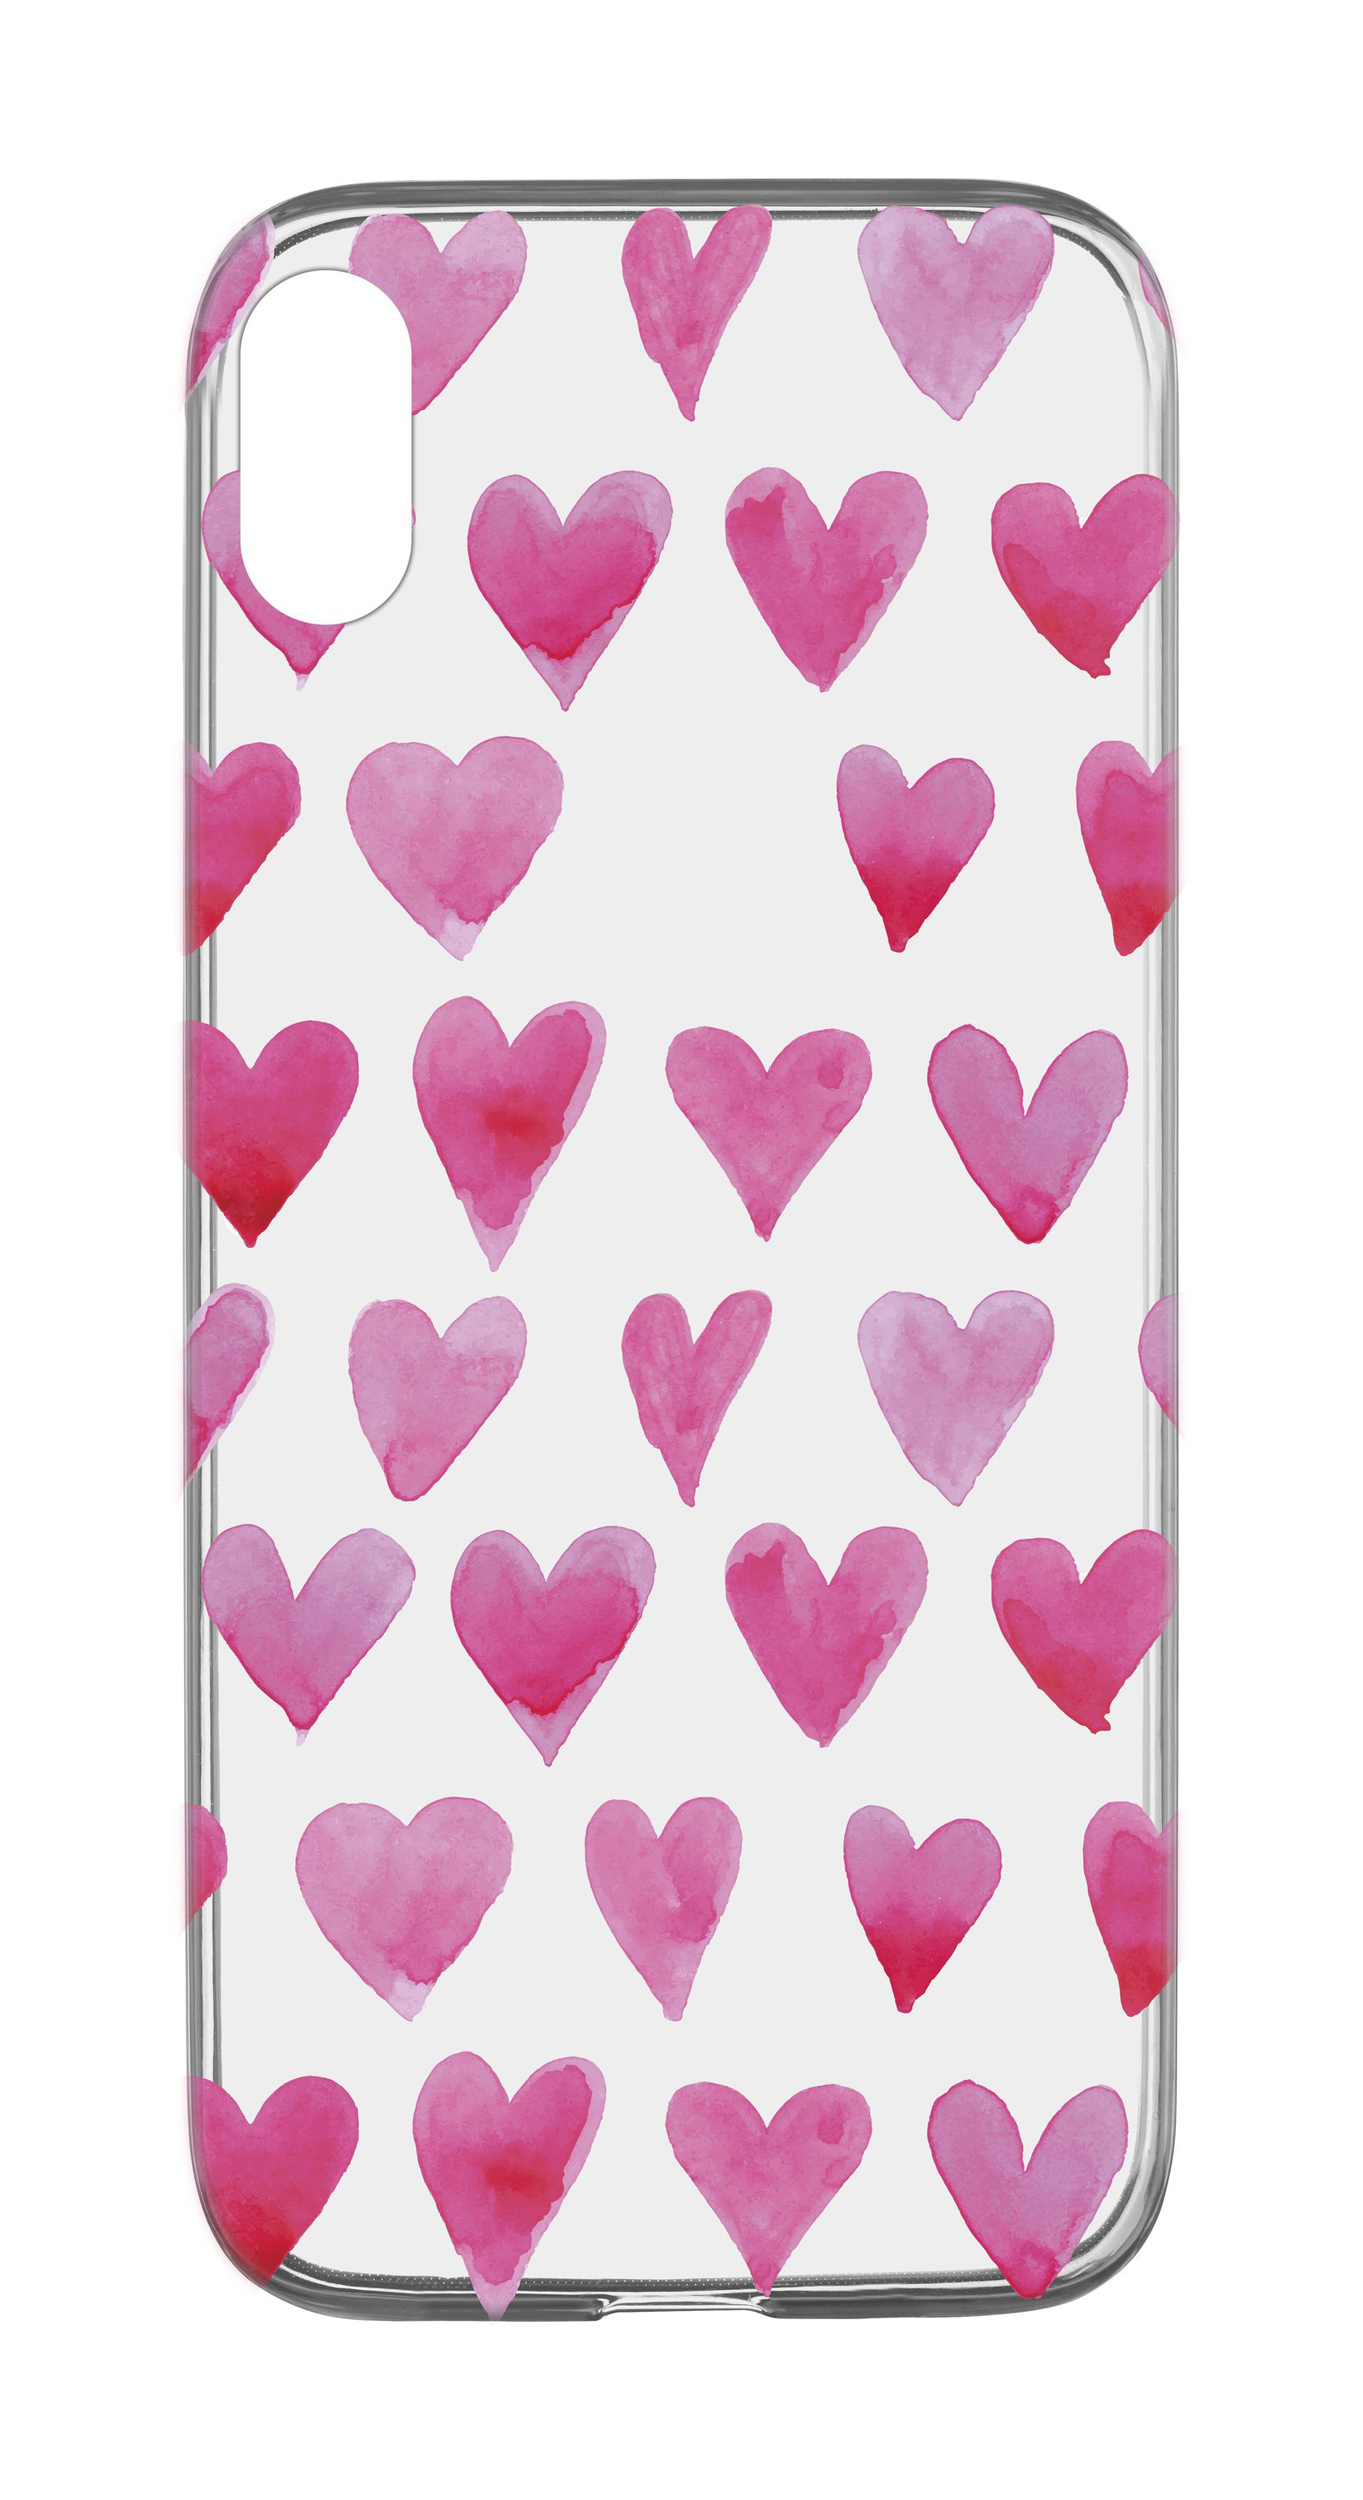 iPhone XR, case style, watercolor heart